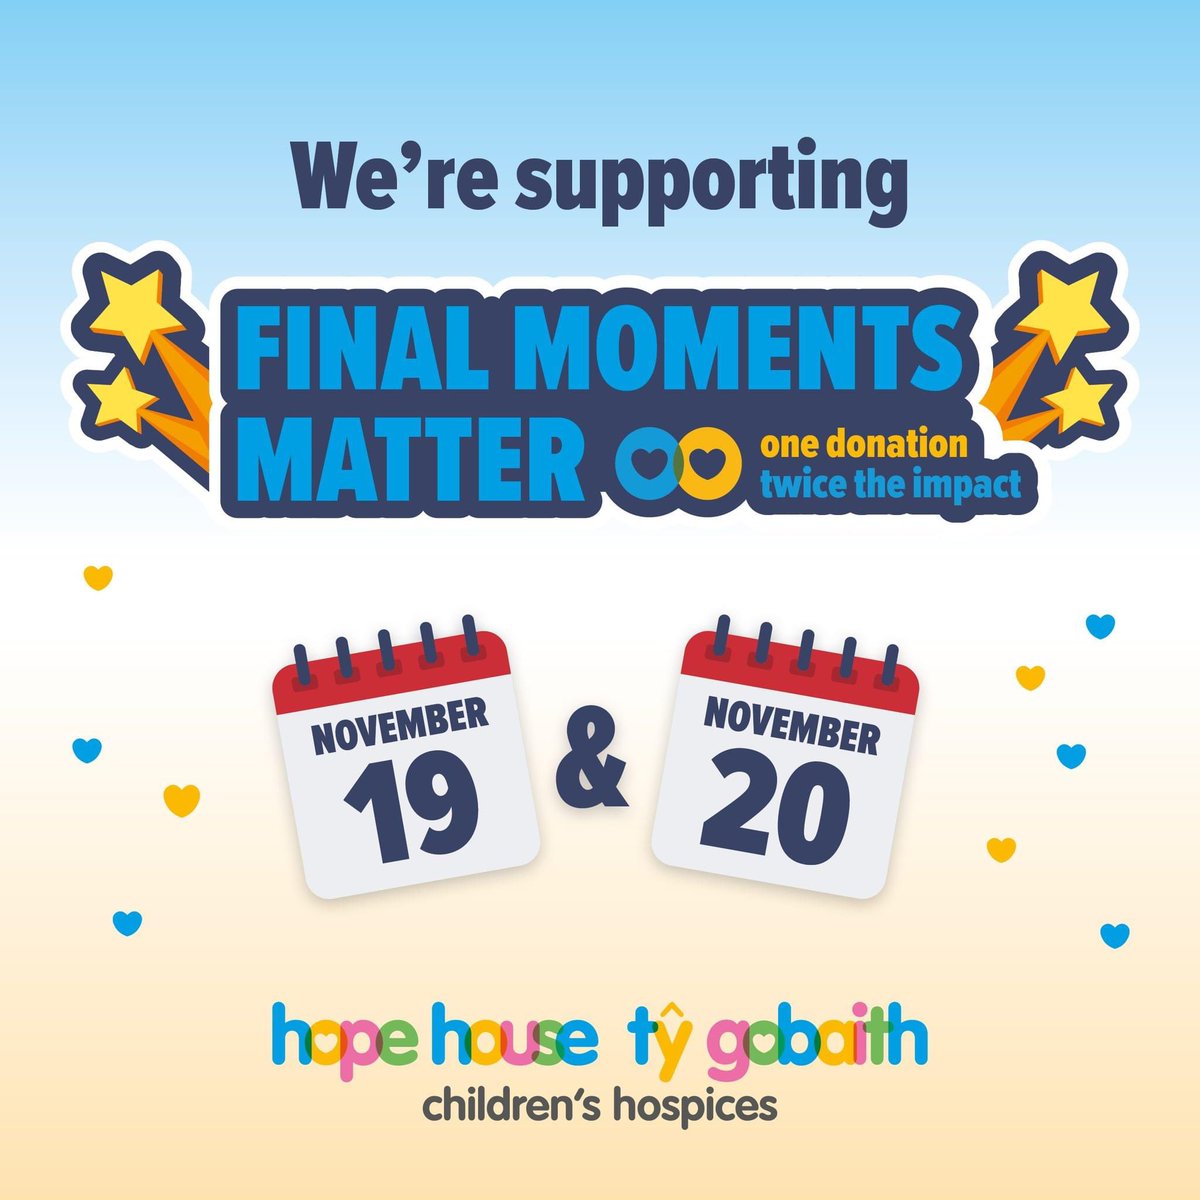 DIOLCH YN FAWR!! 🤩🤩🤩THANK YOU VERY MUCH!!Together, we have raised £3,586 in 36 hours to support Hope House’s Final Moments Matter campaign. Thank you for all donations #finalmomentsmatter